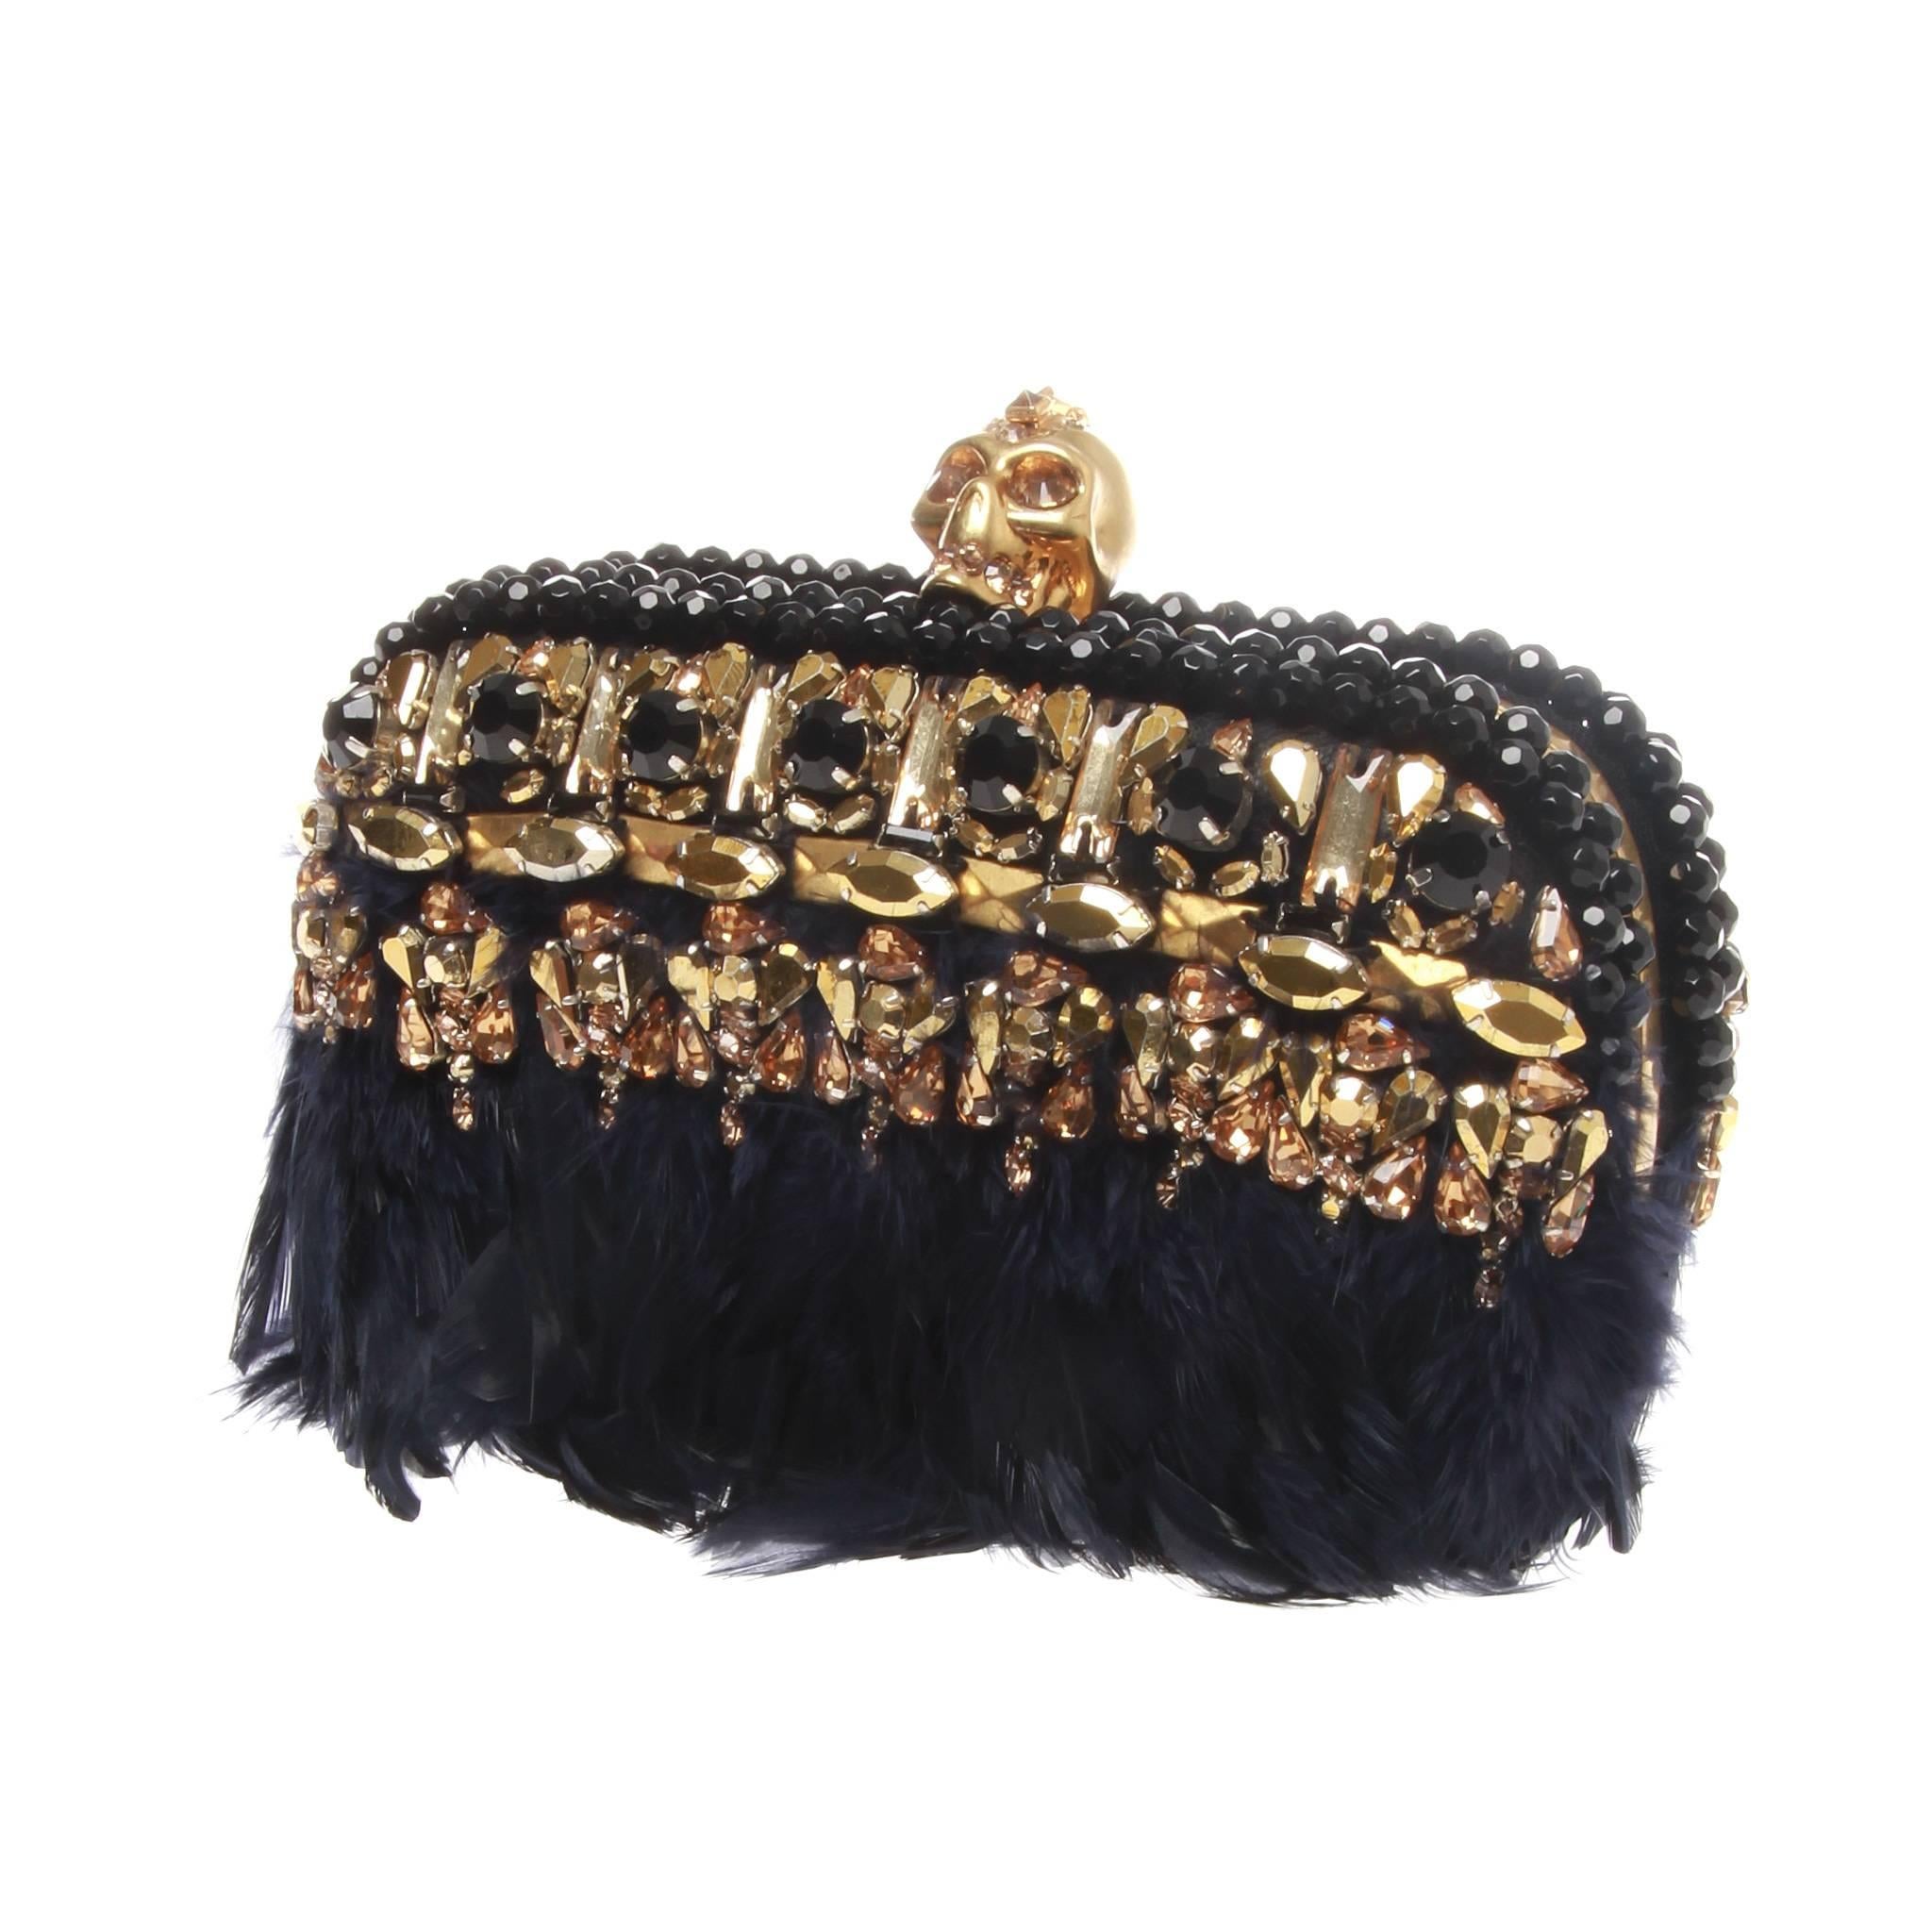 Alexander McQueen skull box clutch featuring goldtone hardware, black and gold beading and navy feathers. Swarovski crystal encrusted skull works as pop clasp at top. Box interior lined with black lambskin. 

Made in Italy 